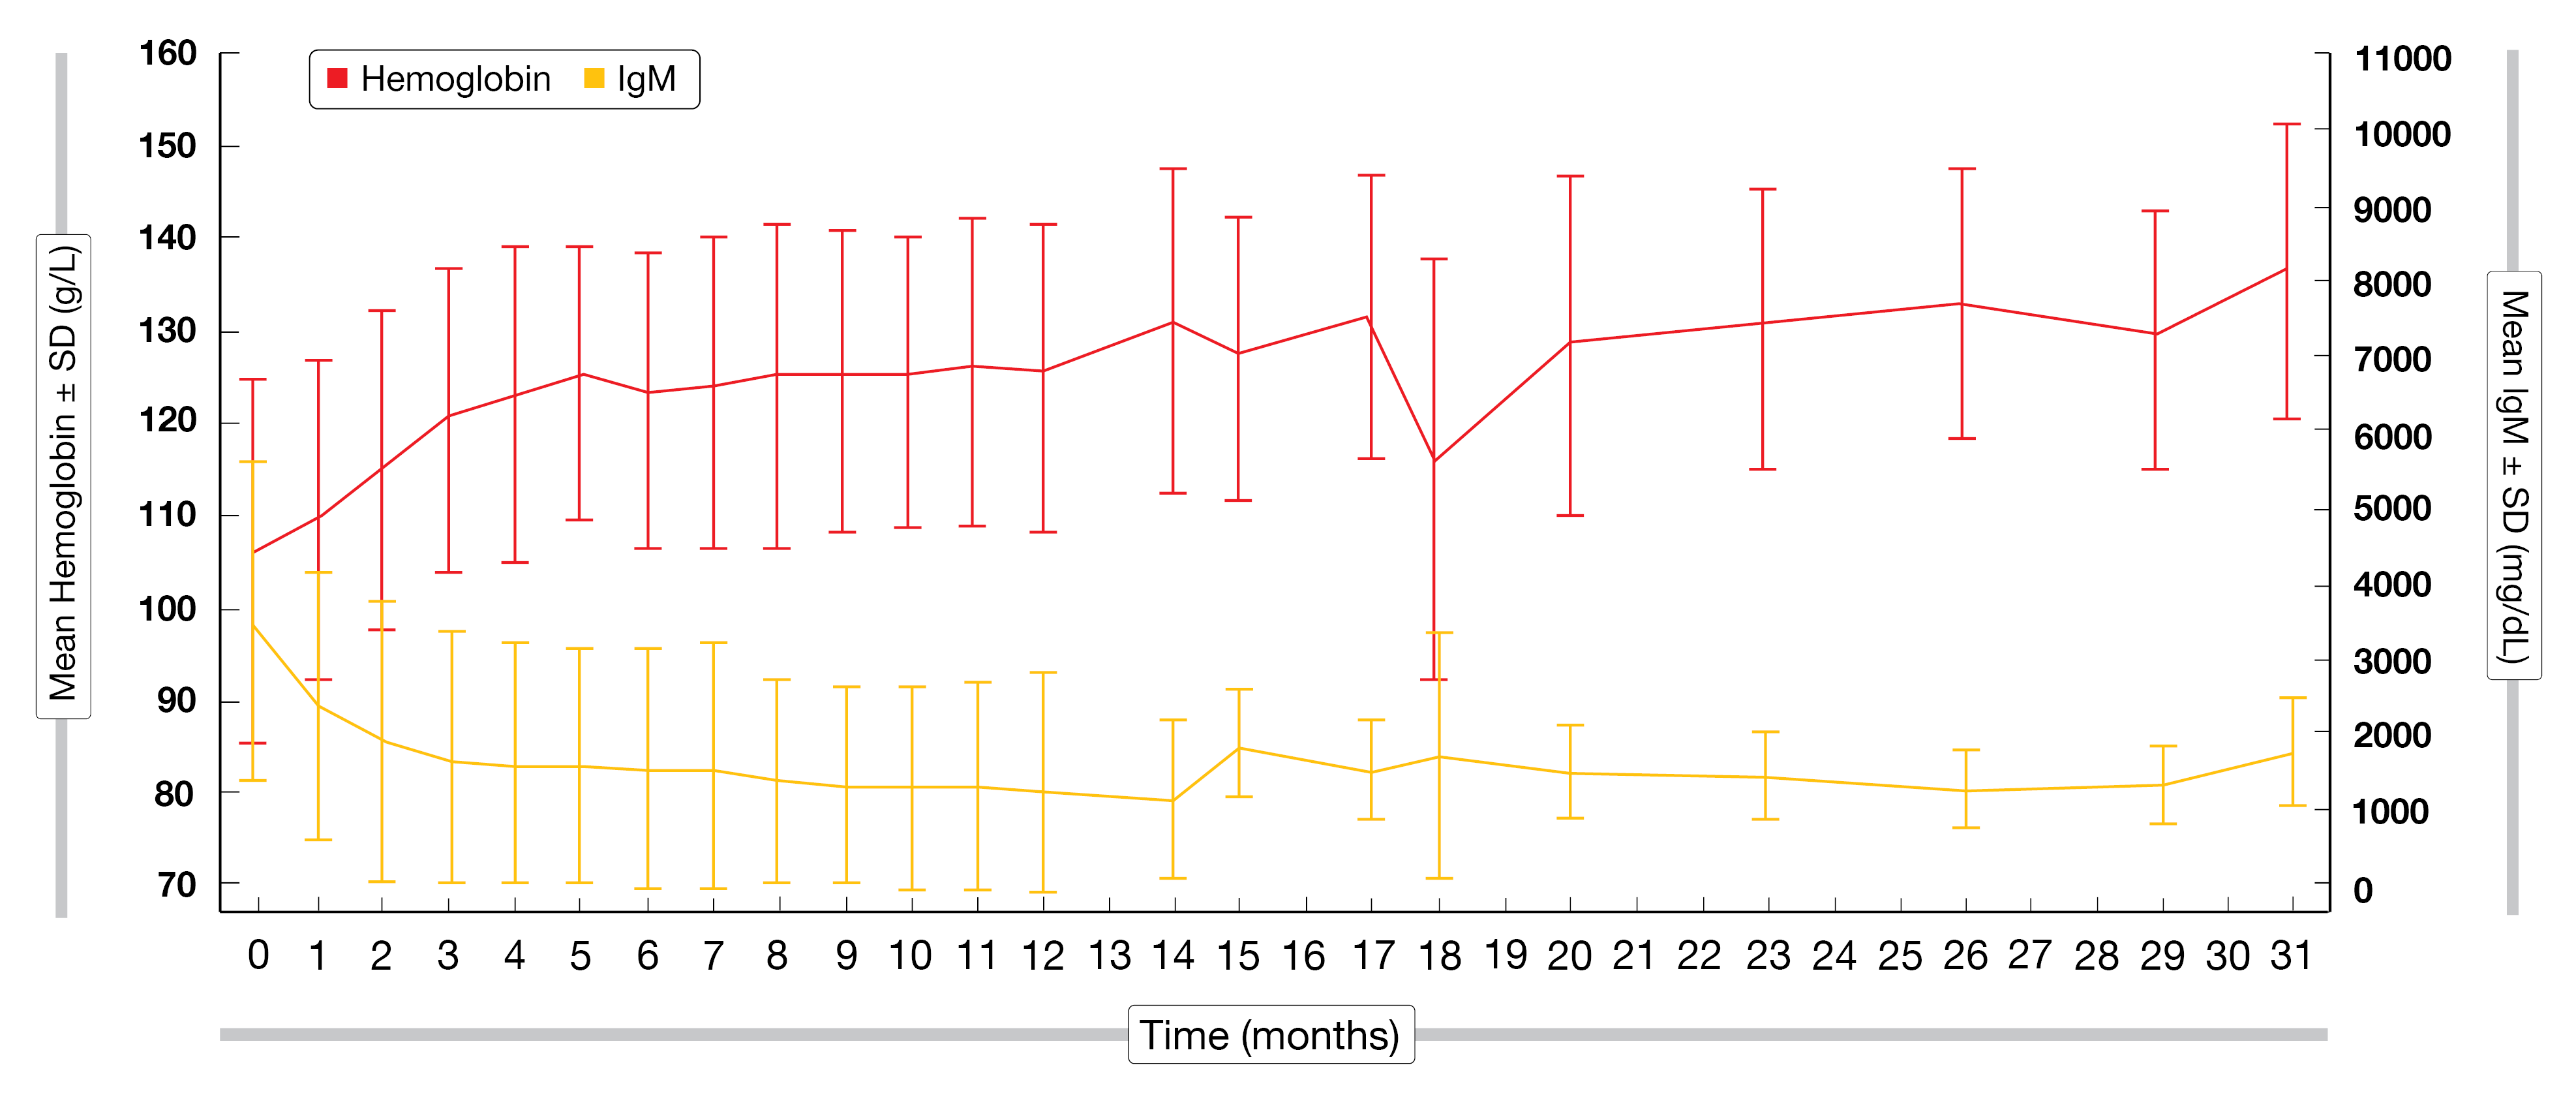 Figure 1: Mean hemoglobin and IgM levels of patients in the R/R disease cohort.